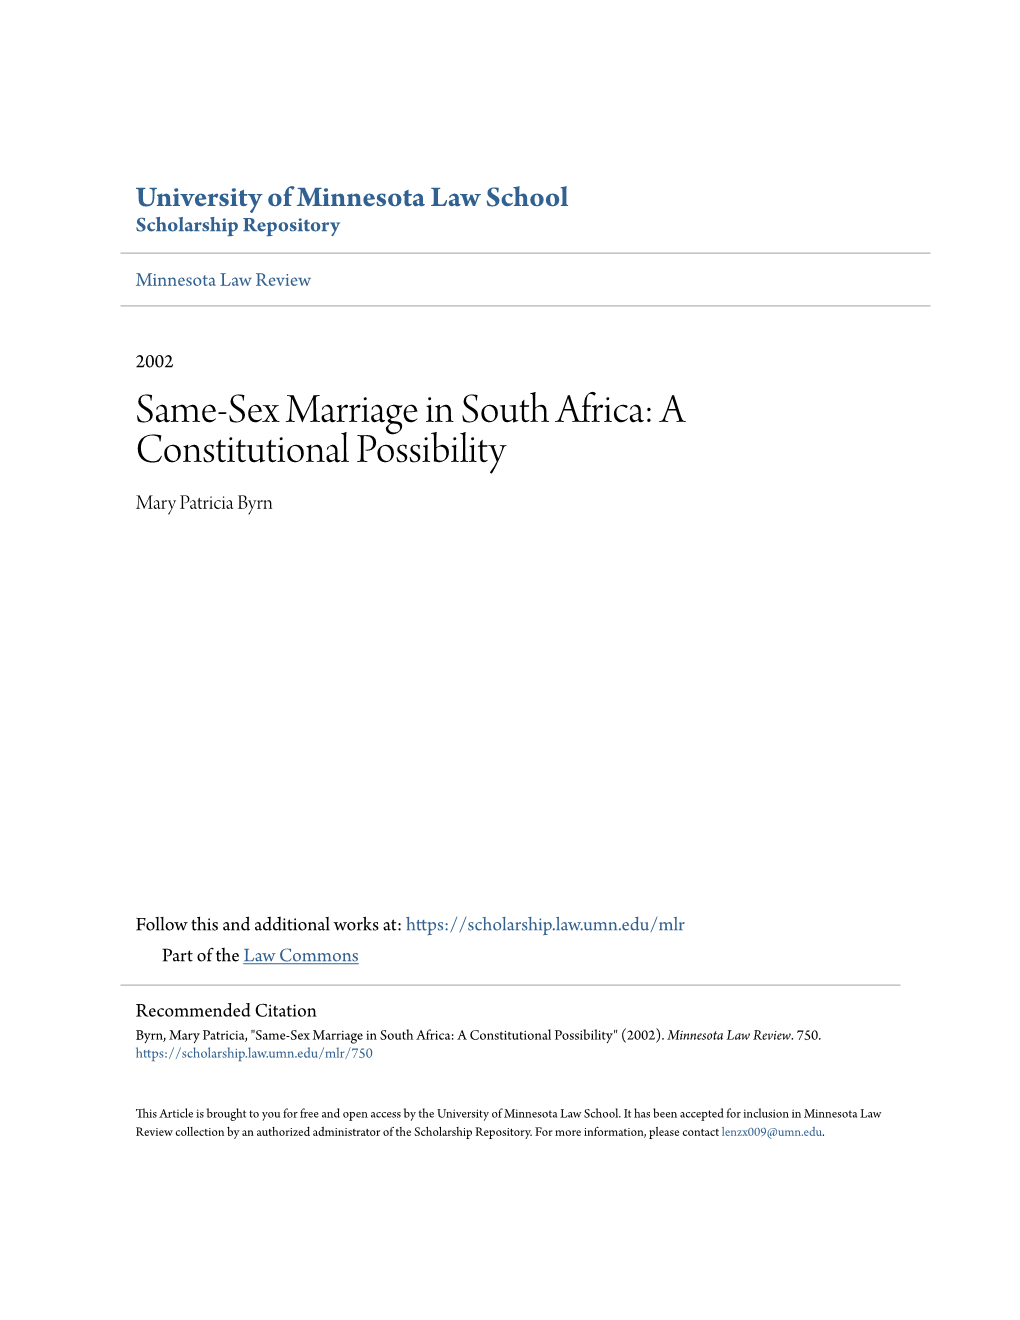 Same-Sex Marriage in South Africa: a Constitutional Possibility Mary Patricia Byrn